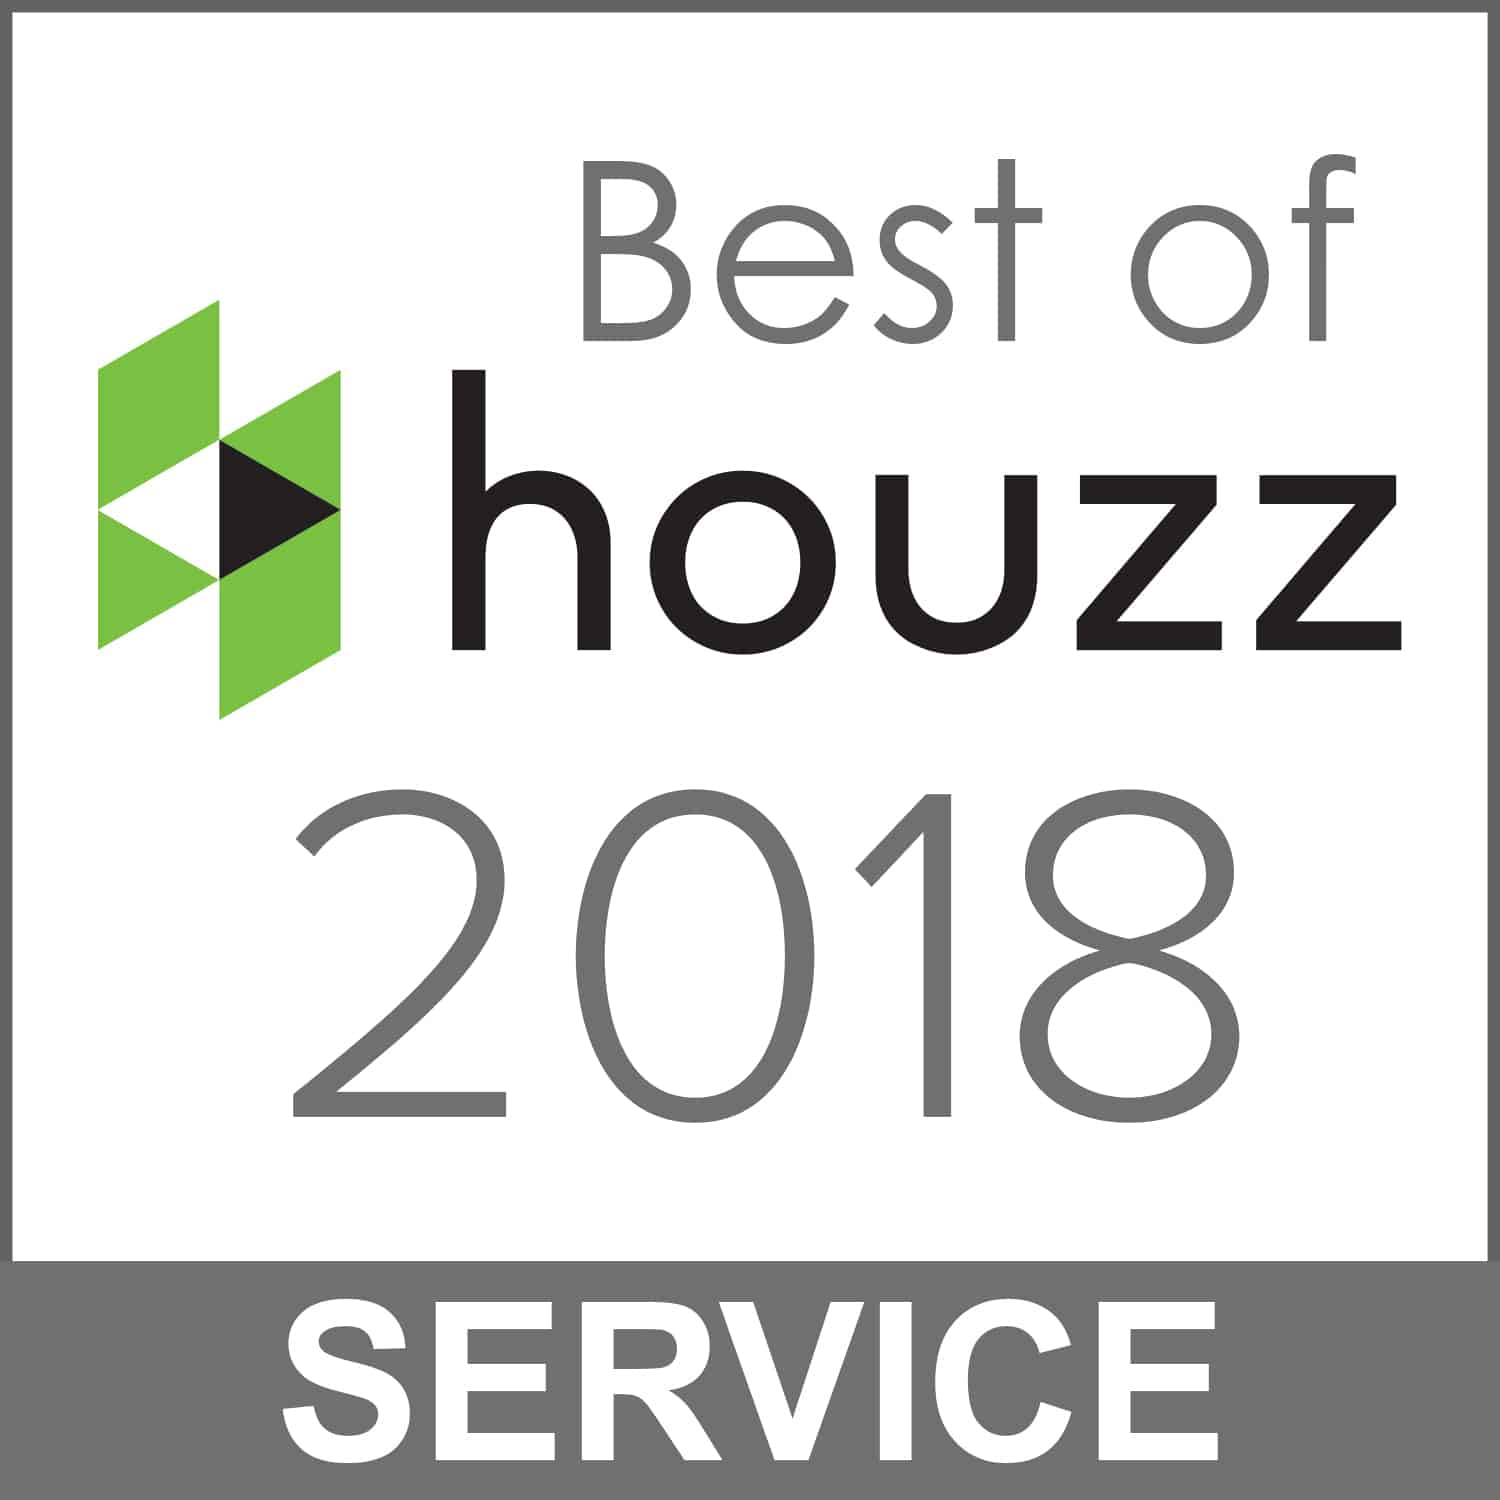 Award-winning interior design service recognized as the Best of Houzz 2018.